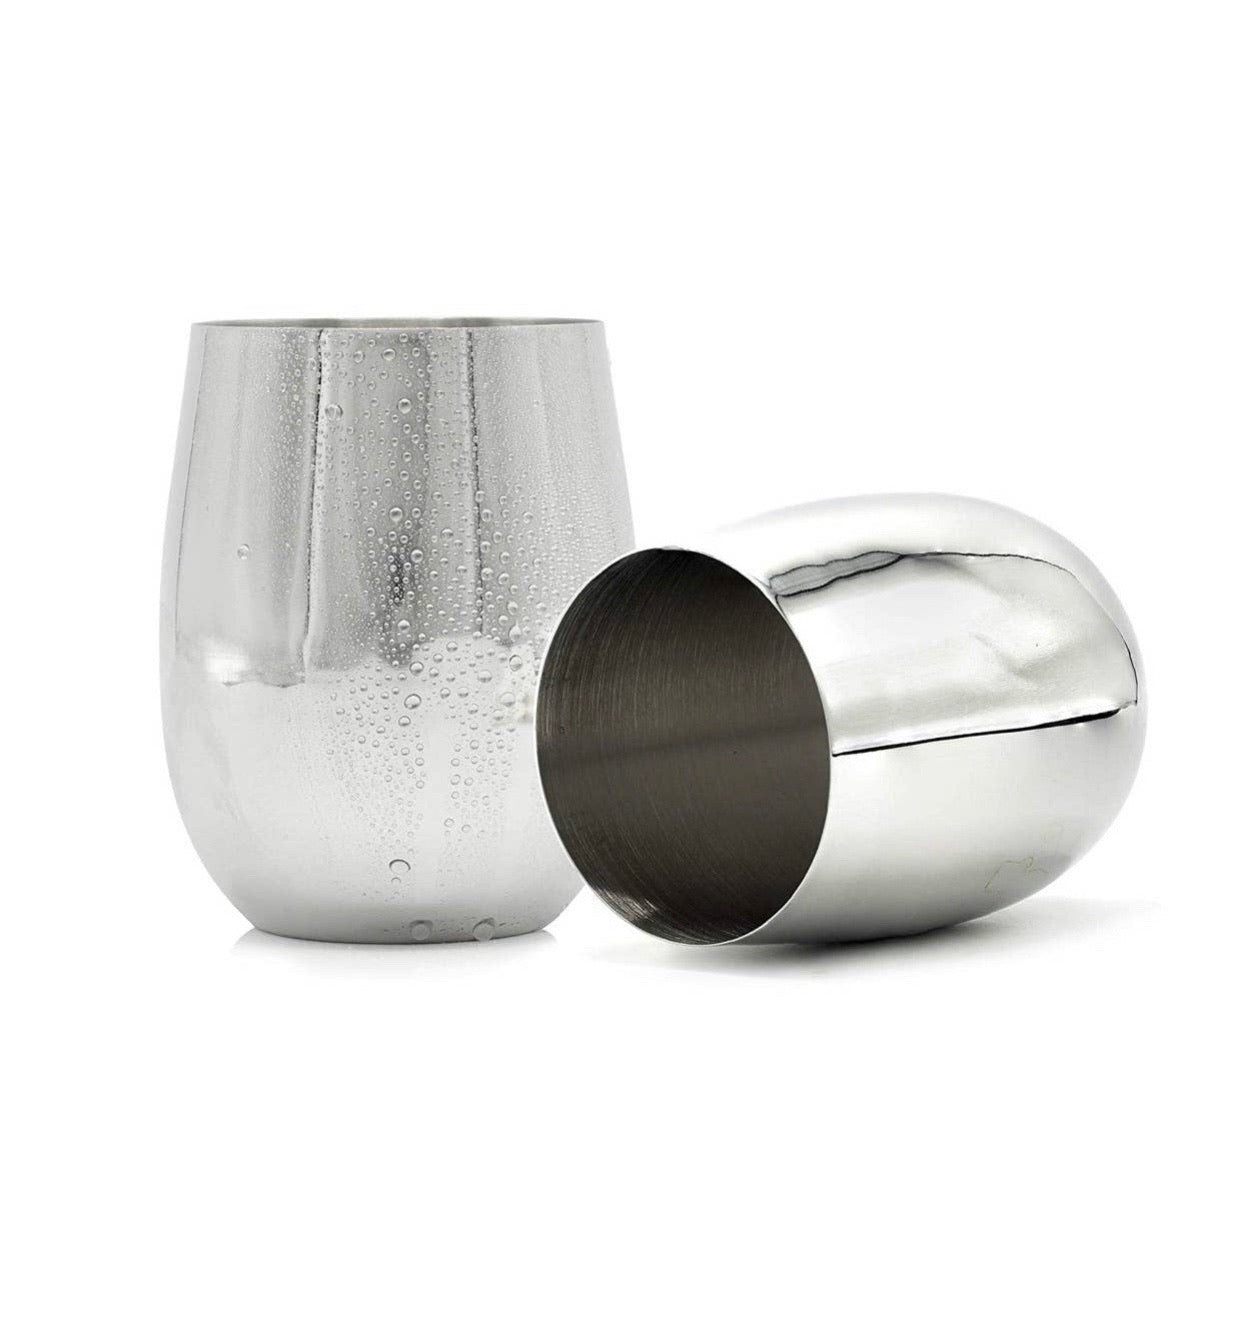 Stainless Steel Cup (Set Of 2)